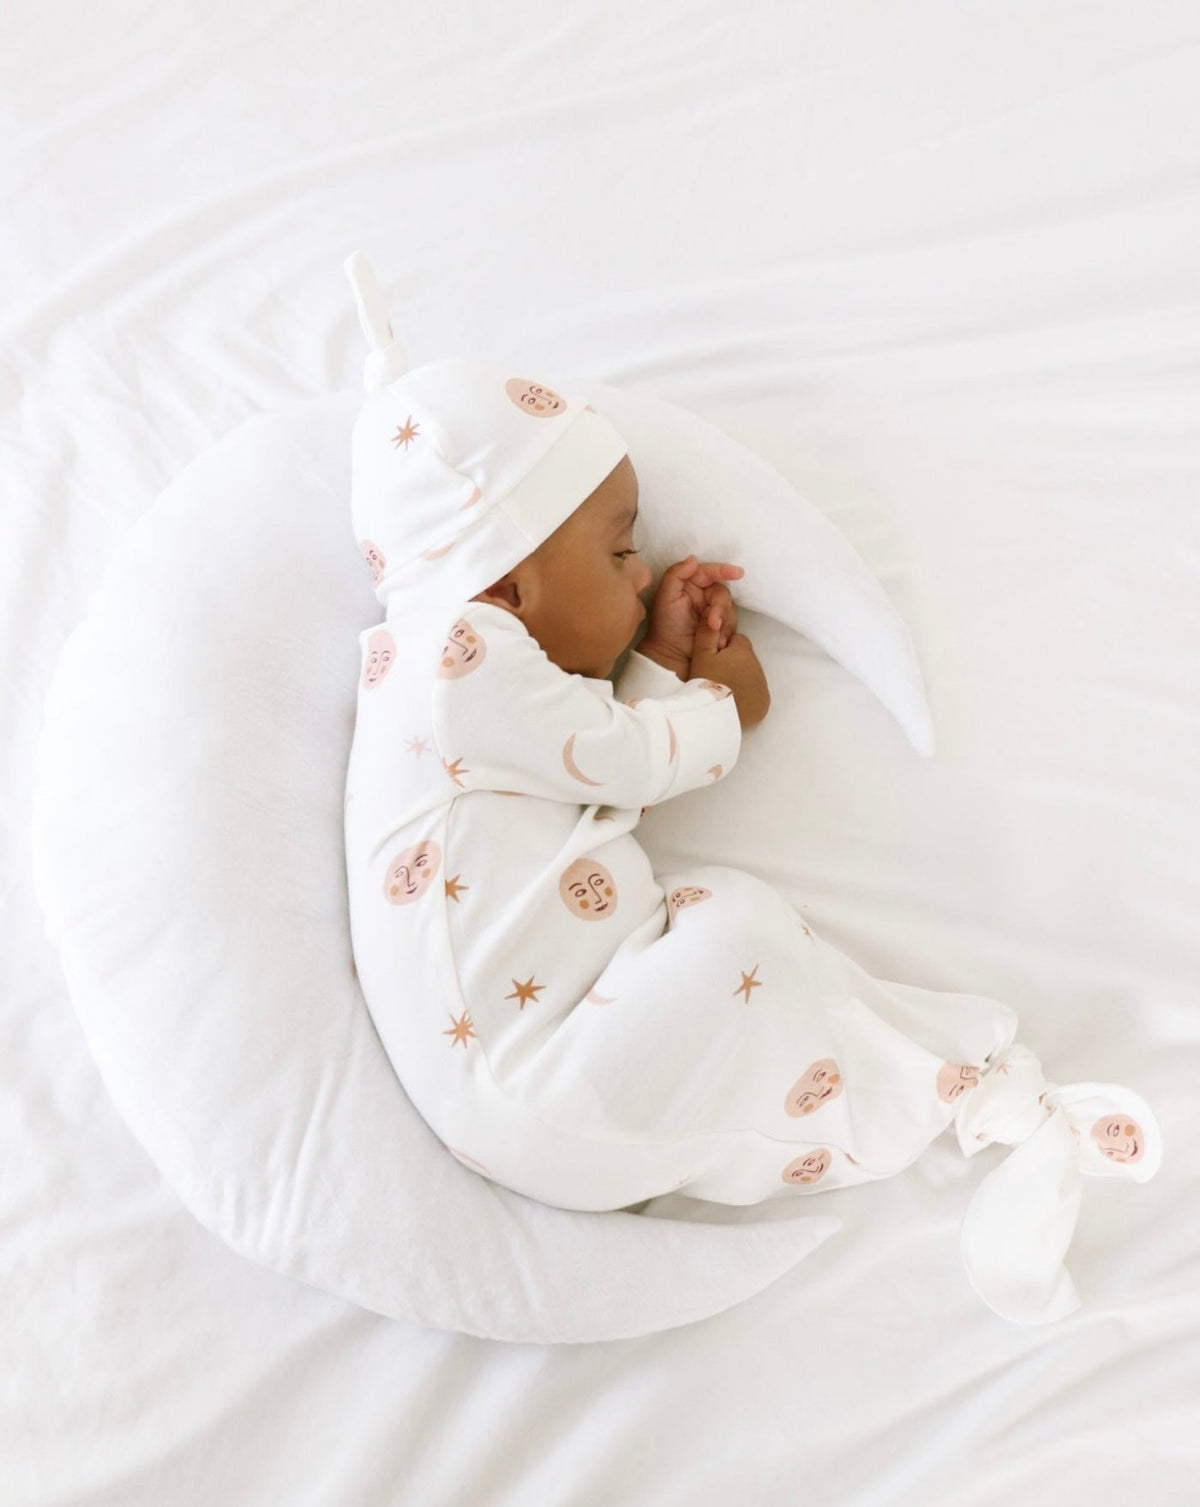 Luna + Luca | Over the Moon Gown + Hat